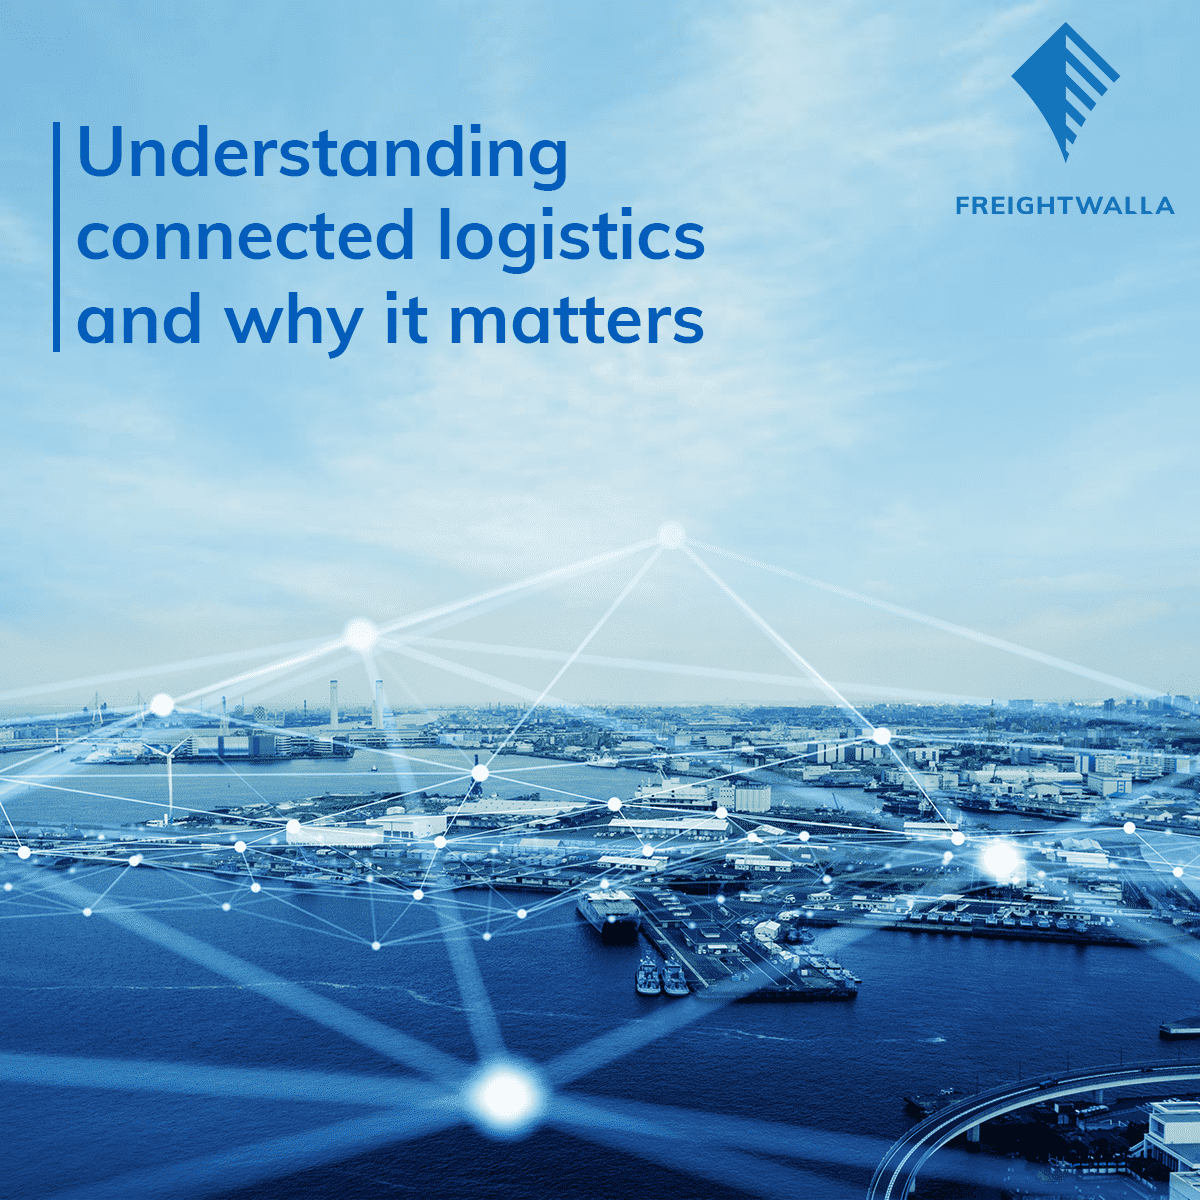 Understanding connected logistics and why it matters